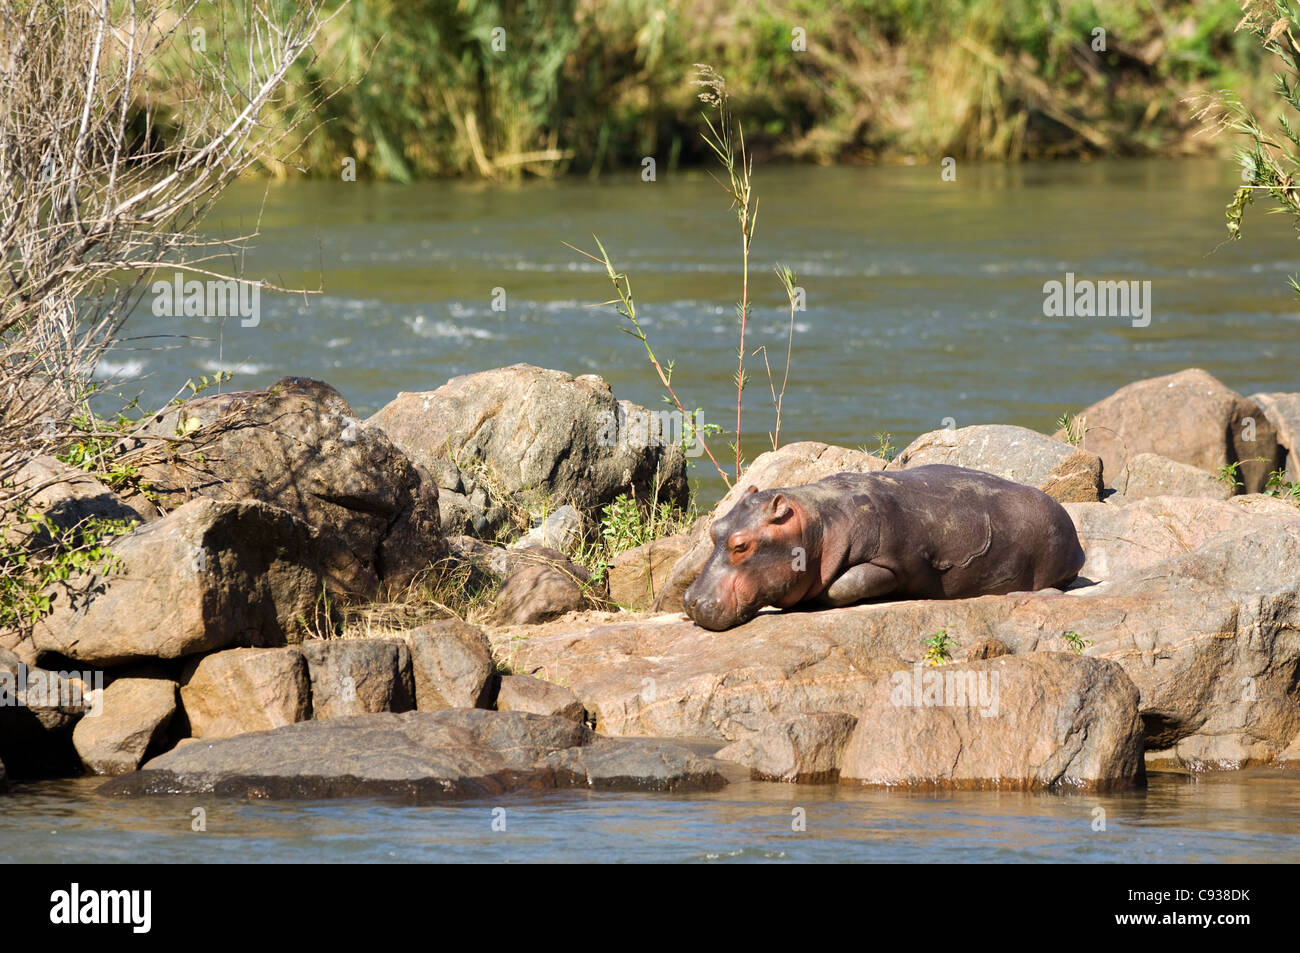 Malawi, Majete Wildlife Reserve. A young hippopotamus relaxes in the sunshine on an island in the Shire River. Stock Photo